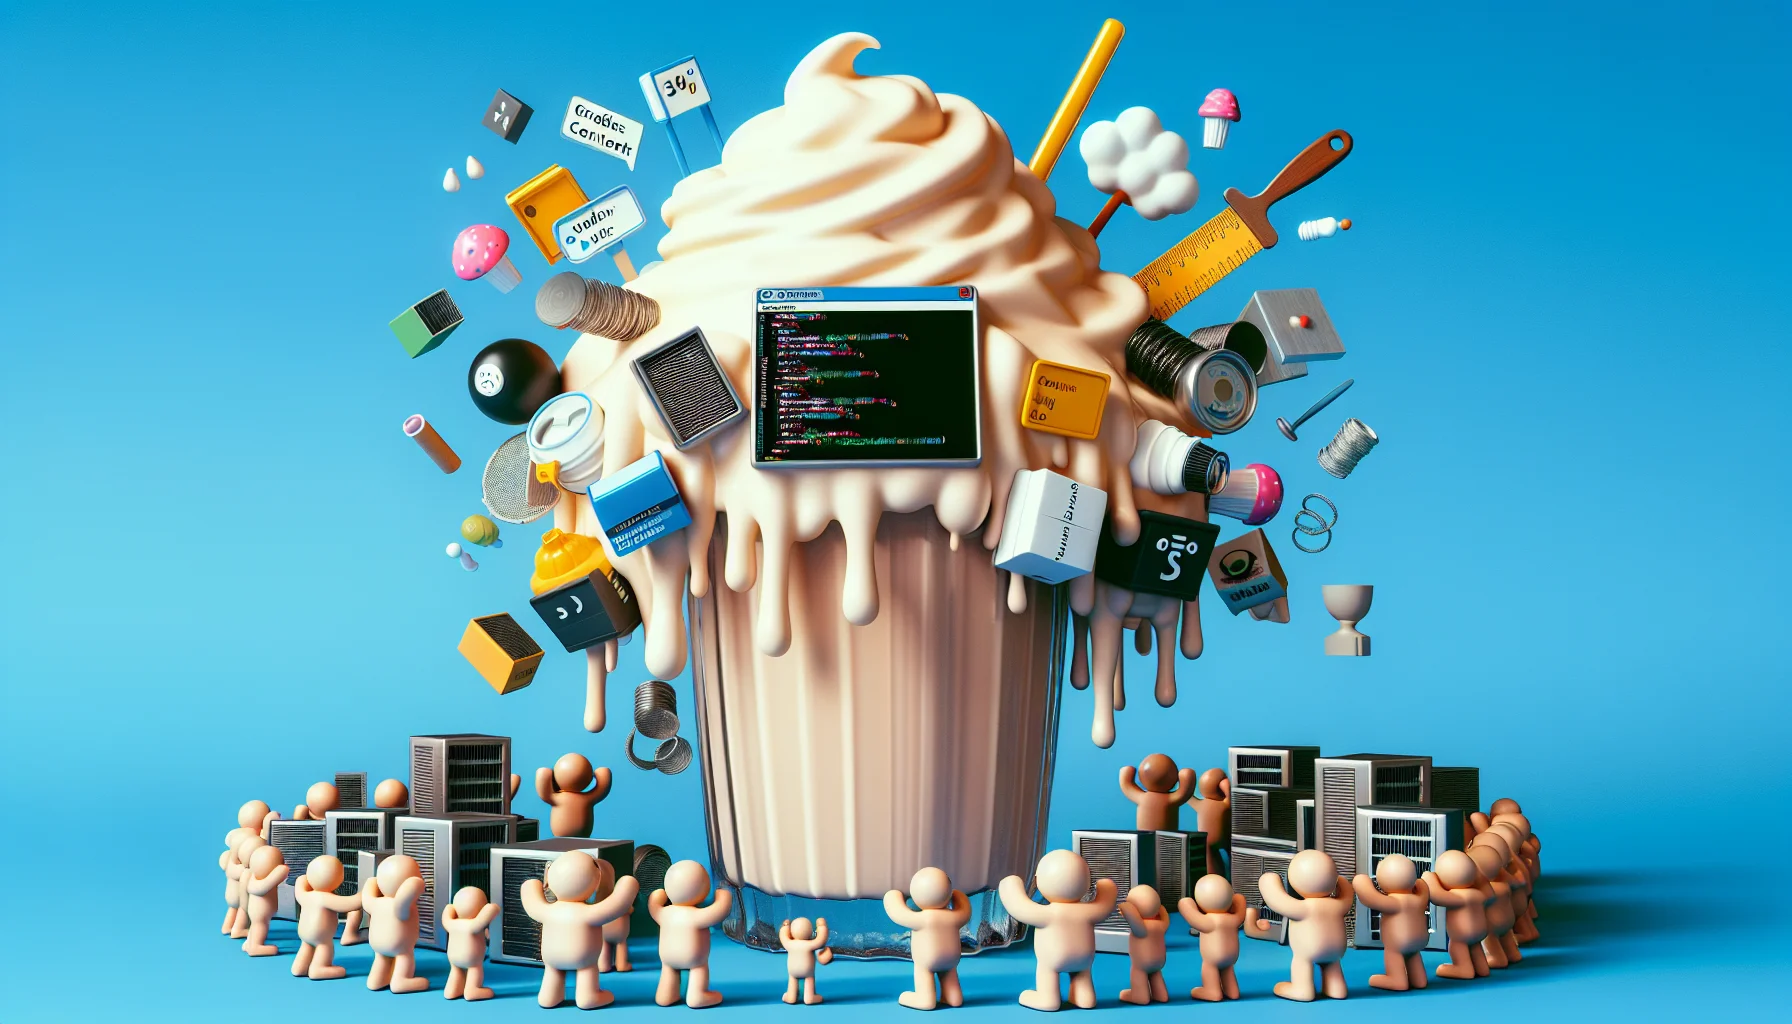 Create a humorous image of a digital design scenario. Visualize a giant, frothy milkshake metaphorically representing a website builder tool. The milkshake overflows with ingredients related to web design: symbols of coding languages, graphics, text content, media files, all blending in with the milkshake. Surrounding the milkshake, show some happy, random web hosting servers represented as miniature, anthropomorphic figures (with no specific gender or descent), excited by the massive, overflowing milkshake, ready to host the new delicious-looking website.